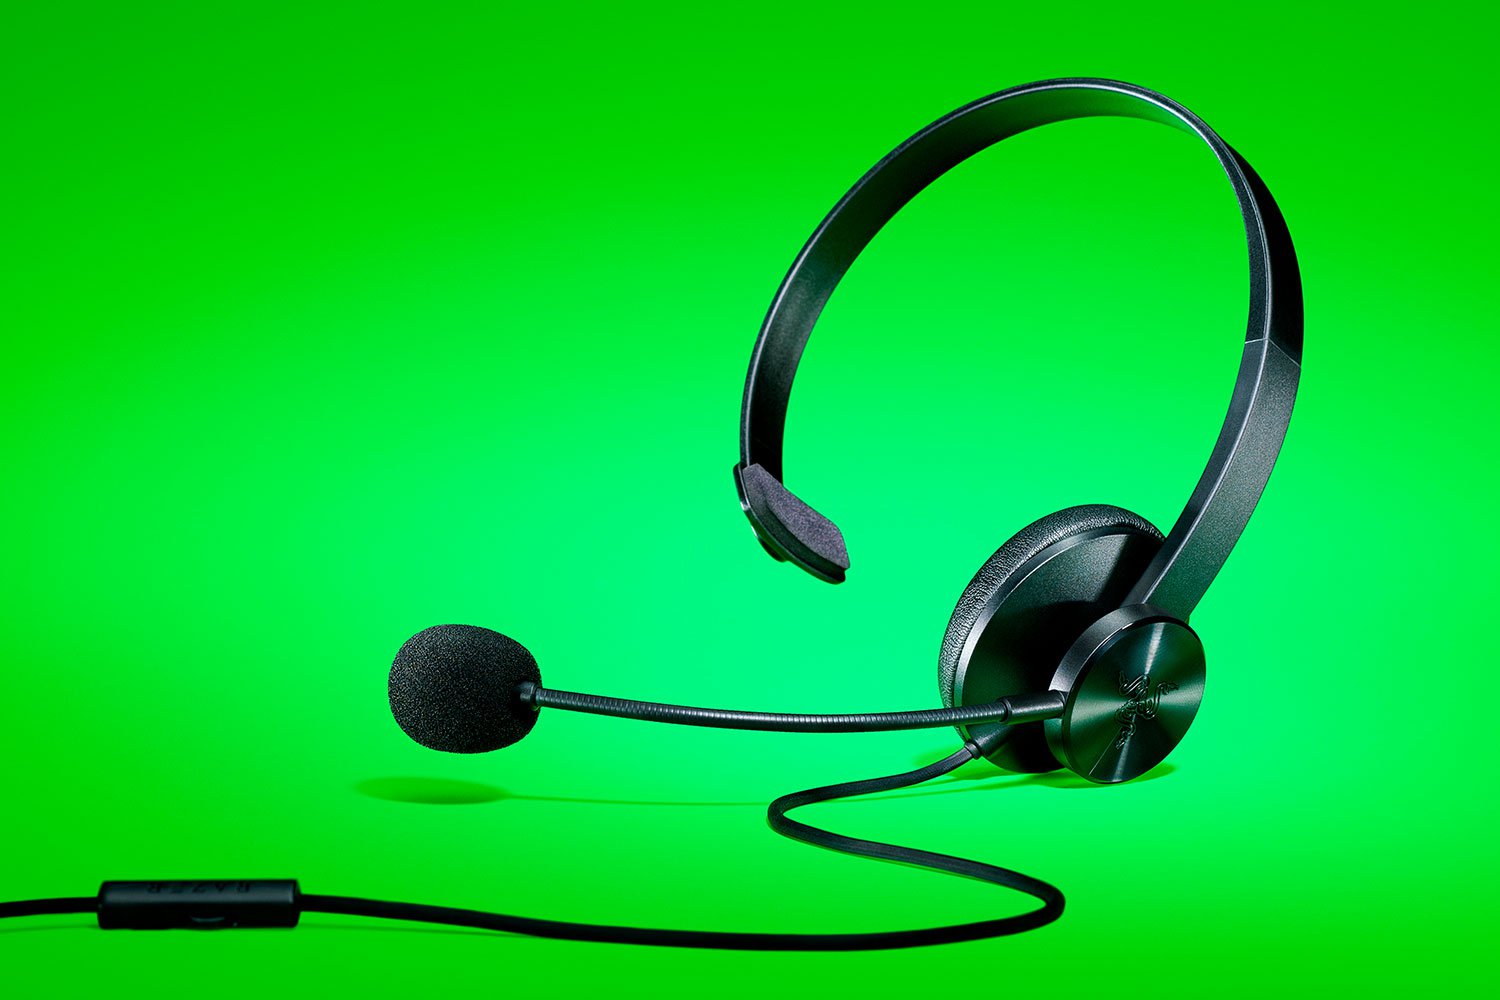 Razer Tetra Console Headset with Microphone